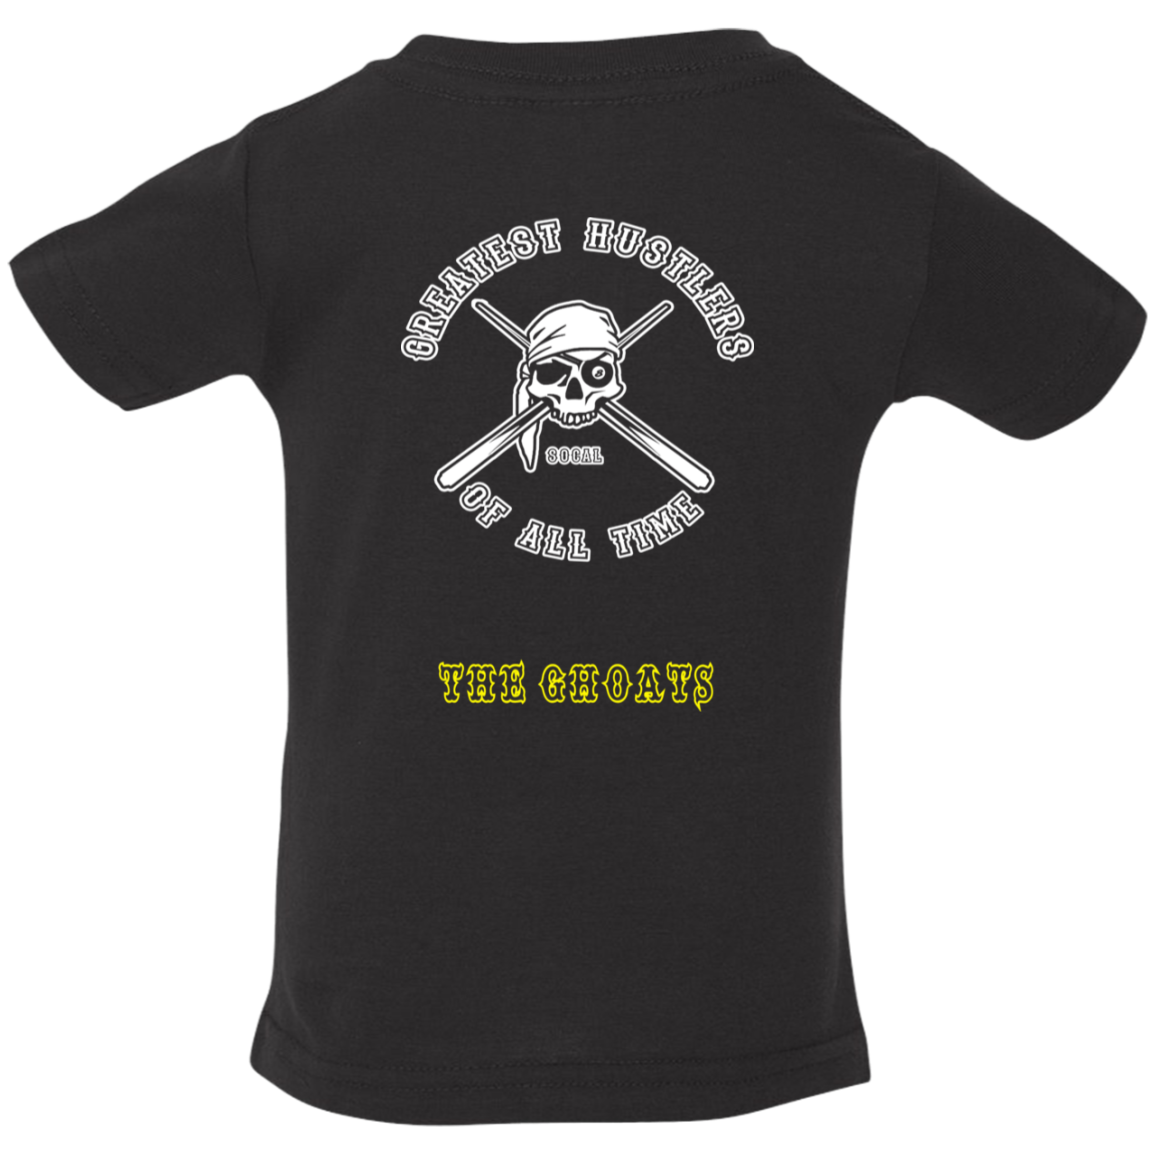 The GHOATS Custom Design. #4 Motorcycle Club Style. Ver 1/2. Infant Jersey T-Shirt